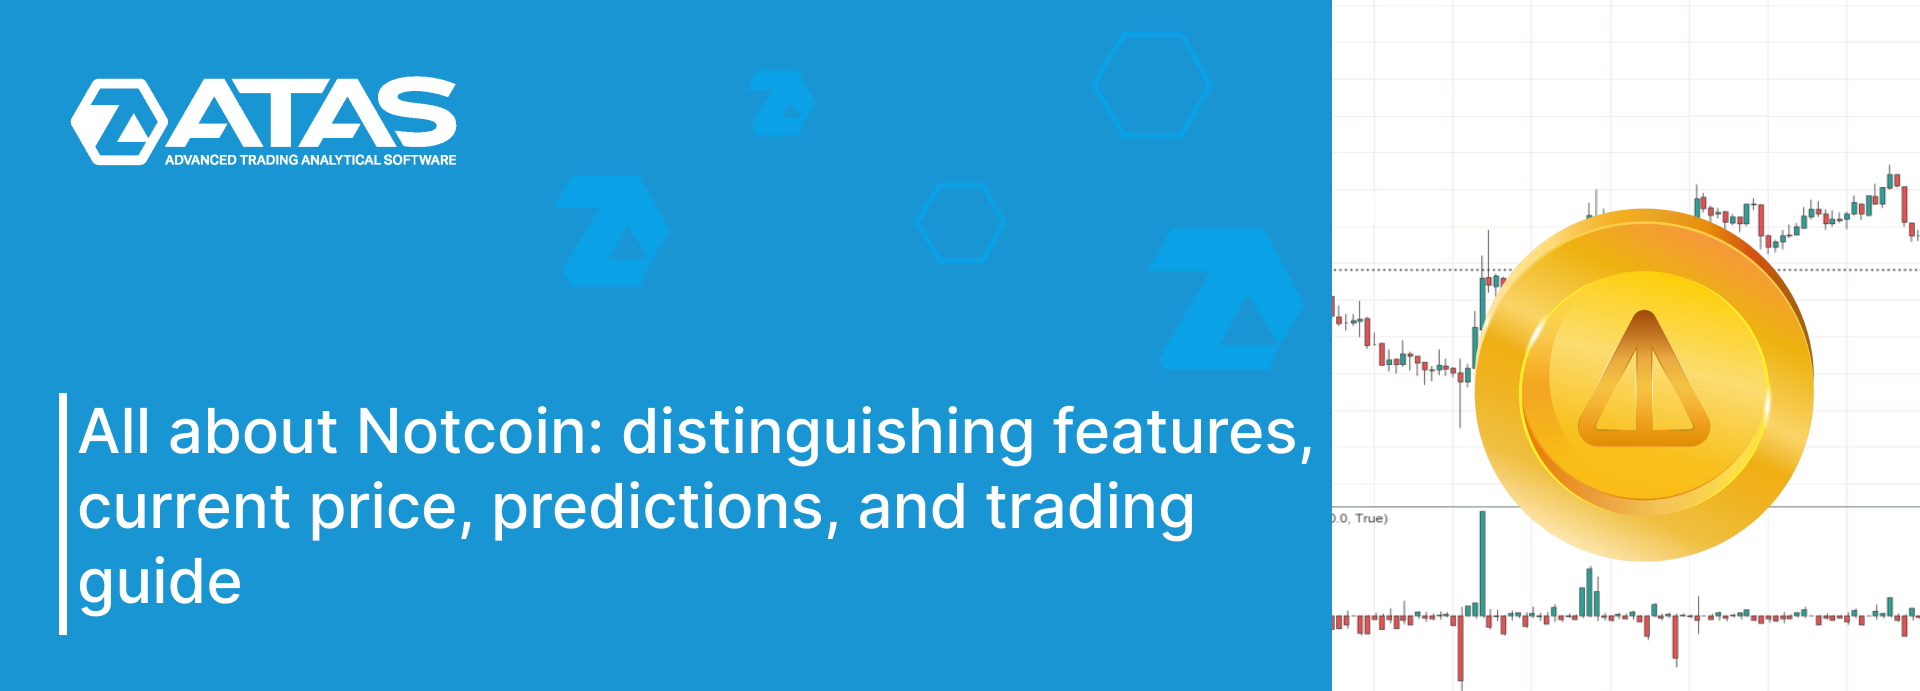 All About Notcoin_ Distinguishing Features, Current Price, Predictions, and Trading Guide (1)